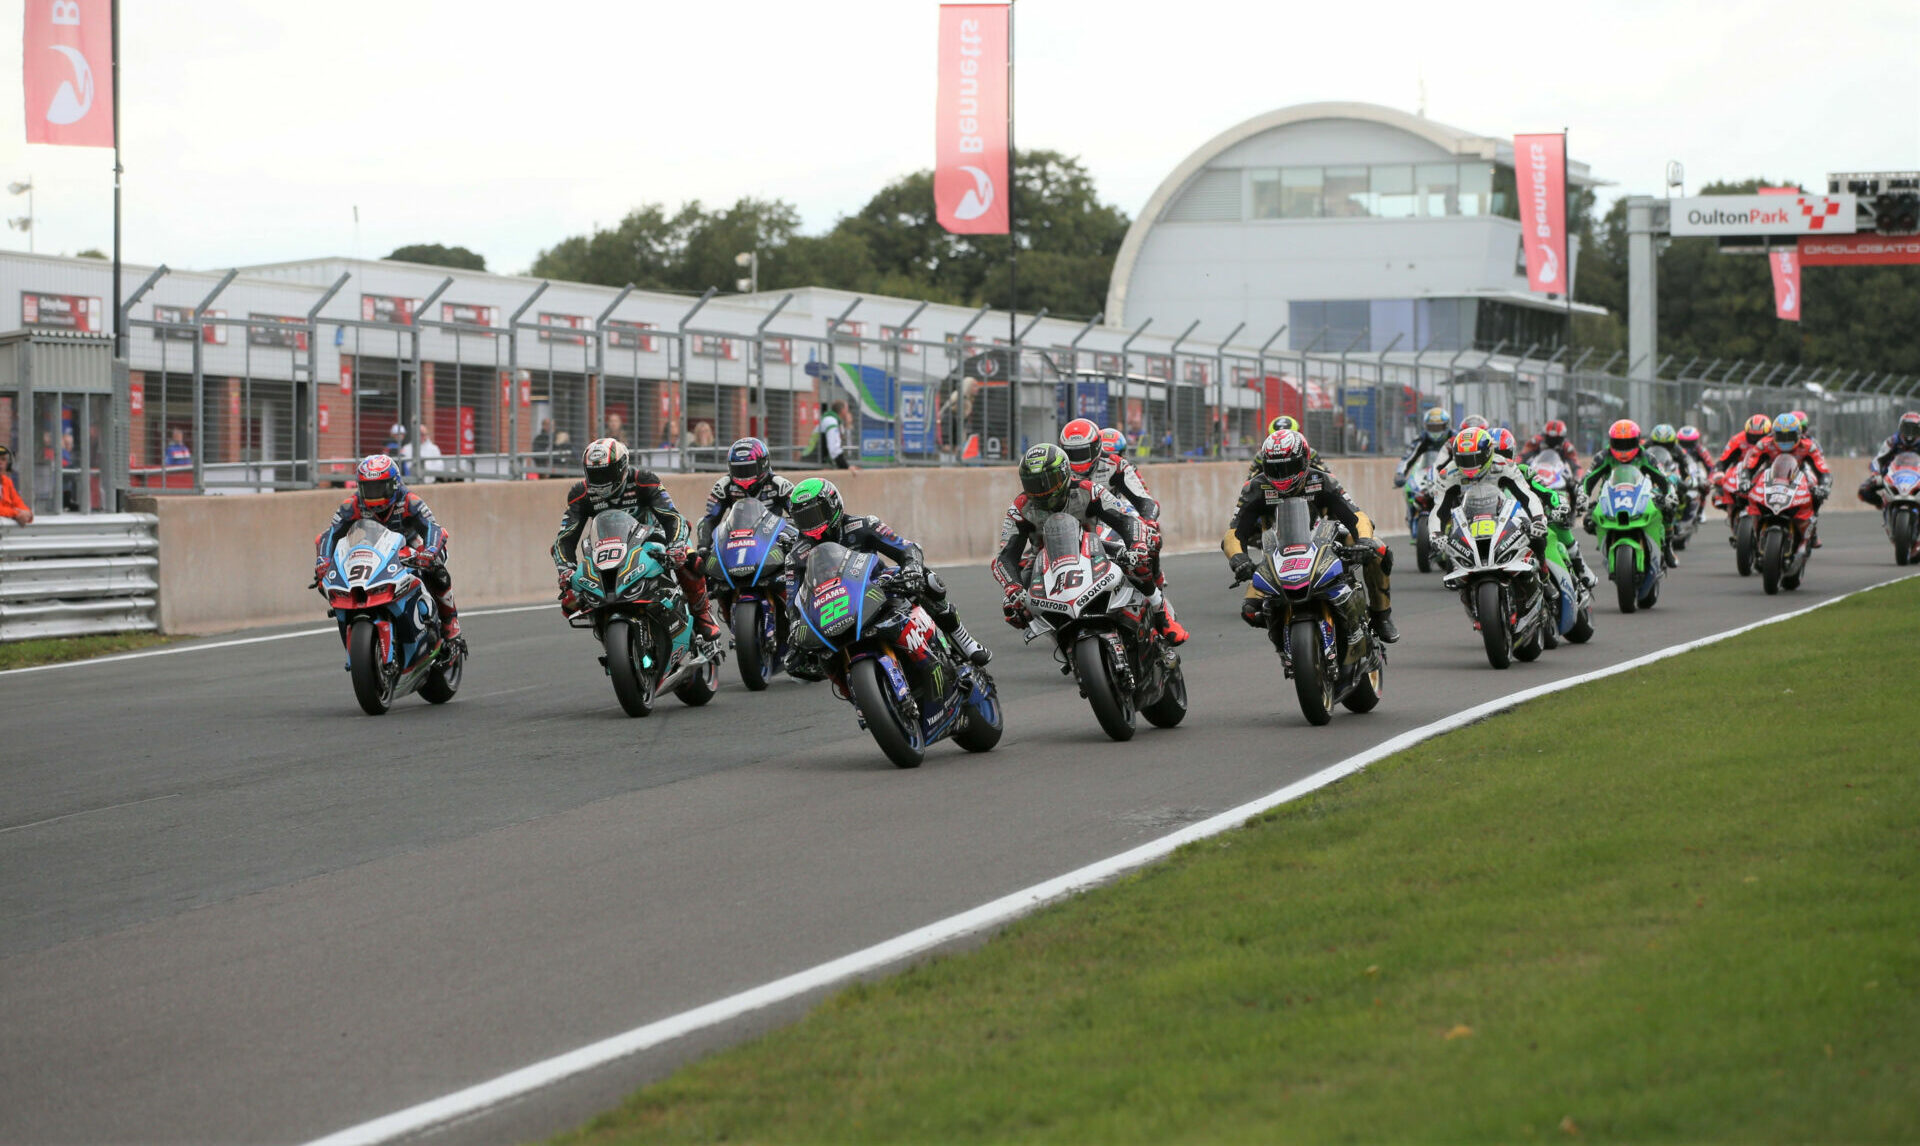 The start of British Superbike Race One with Jason O'Halloran (22) taking an early advantage. Photo courtesy MSVR.